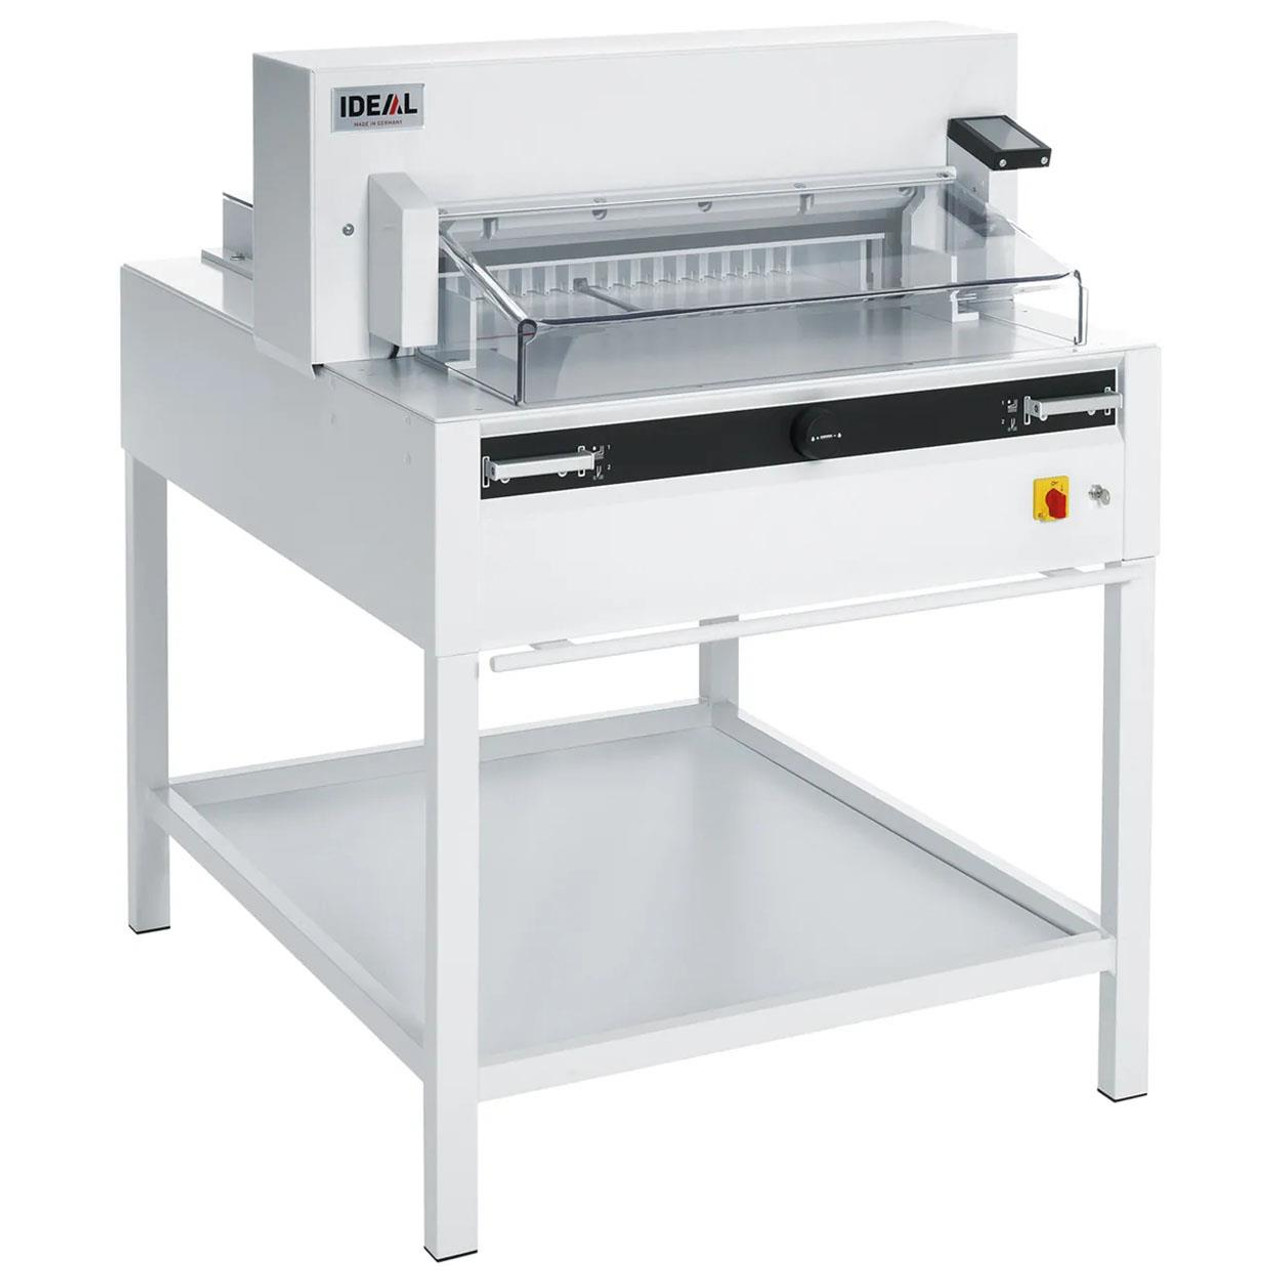 IDEAL 6655 Paper Guillotine